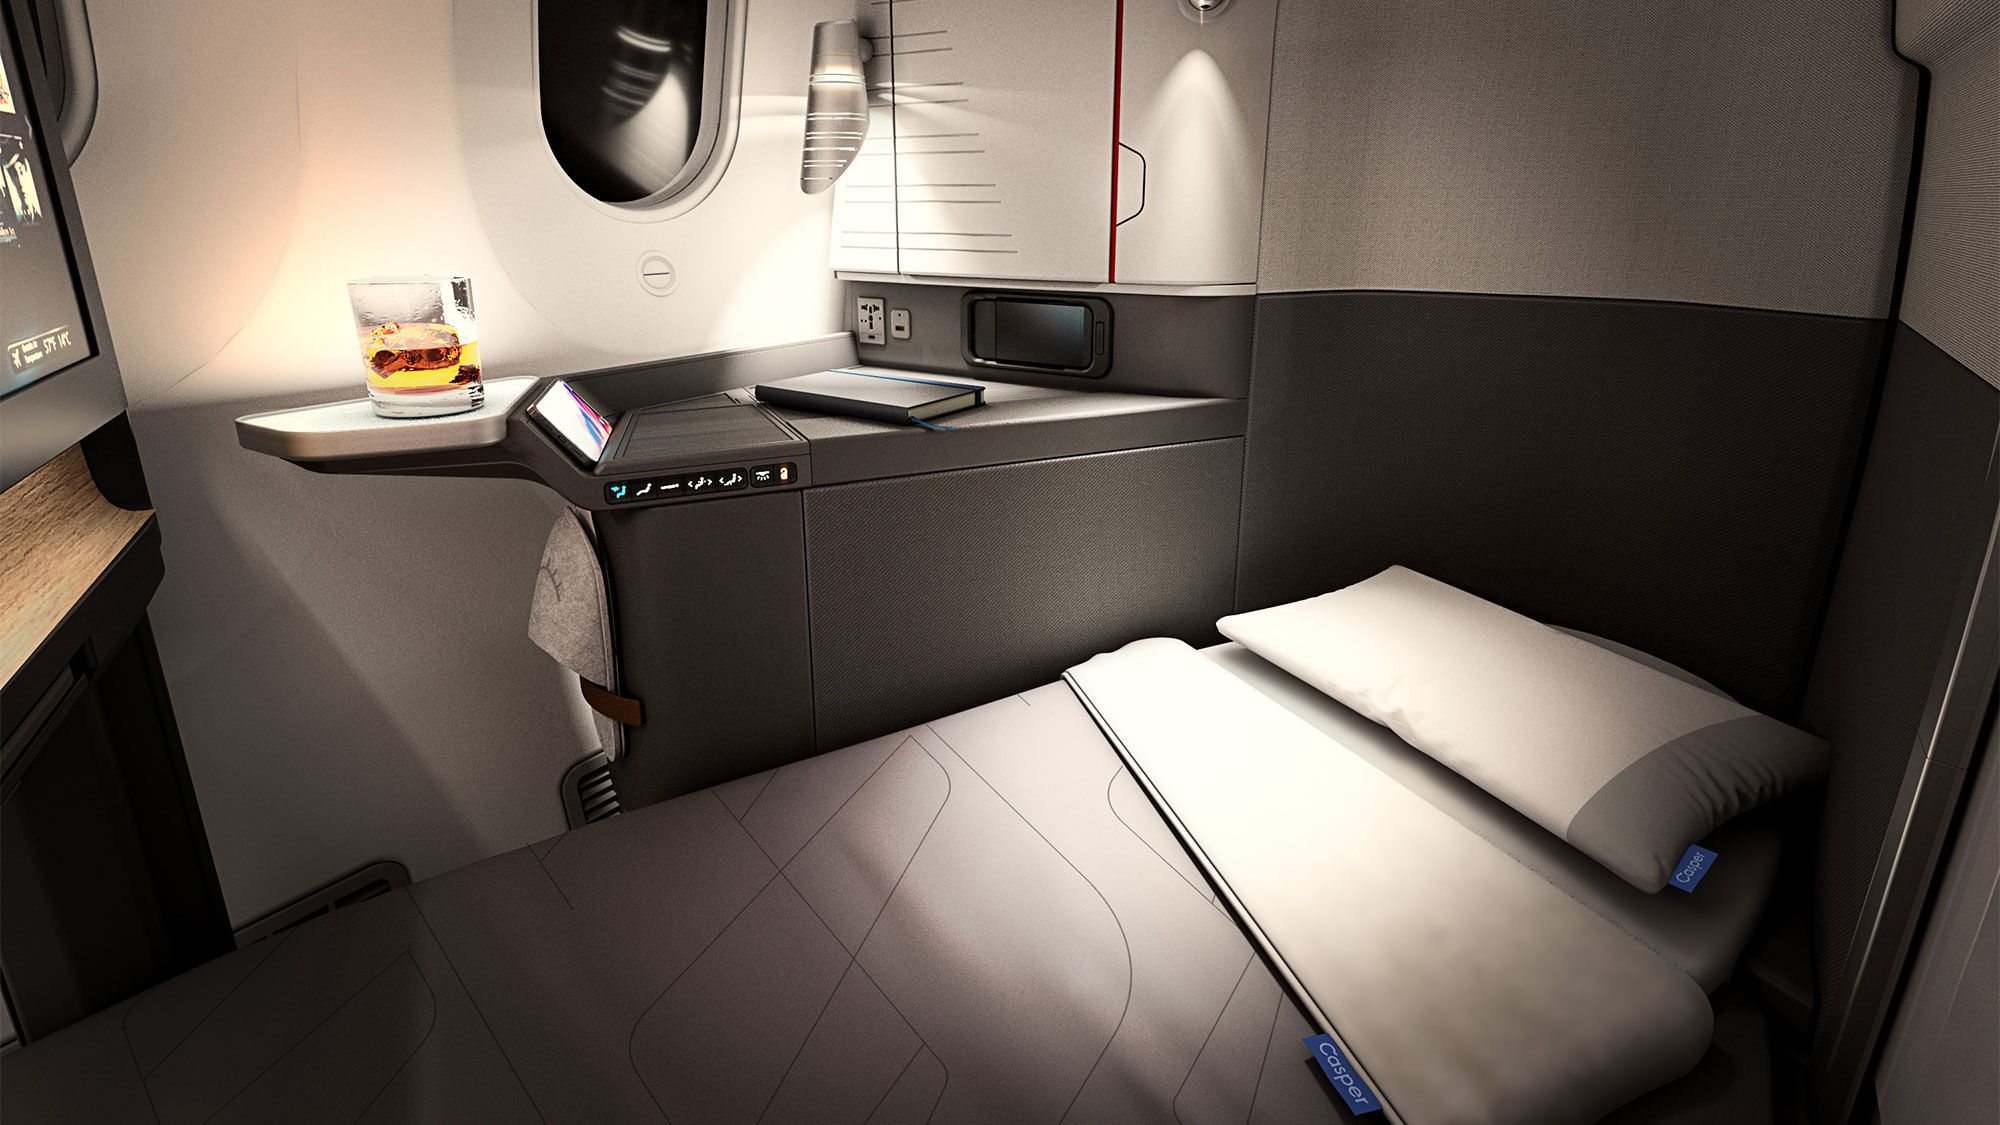 American Airlines unveils Flagship Suite in business class: Travel Weekly